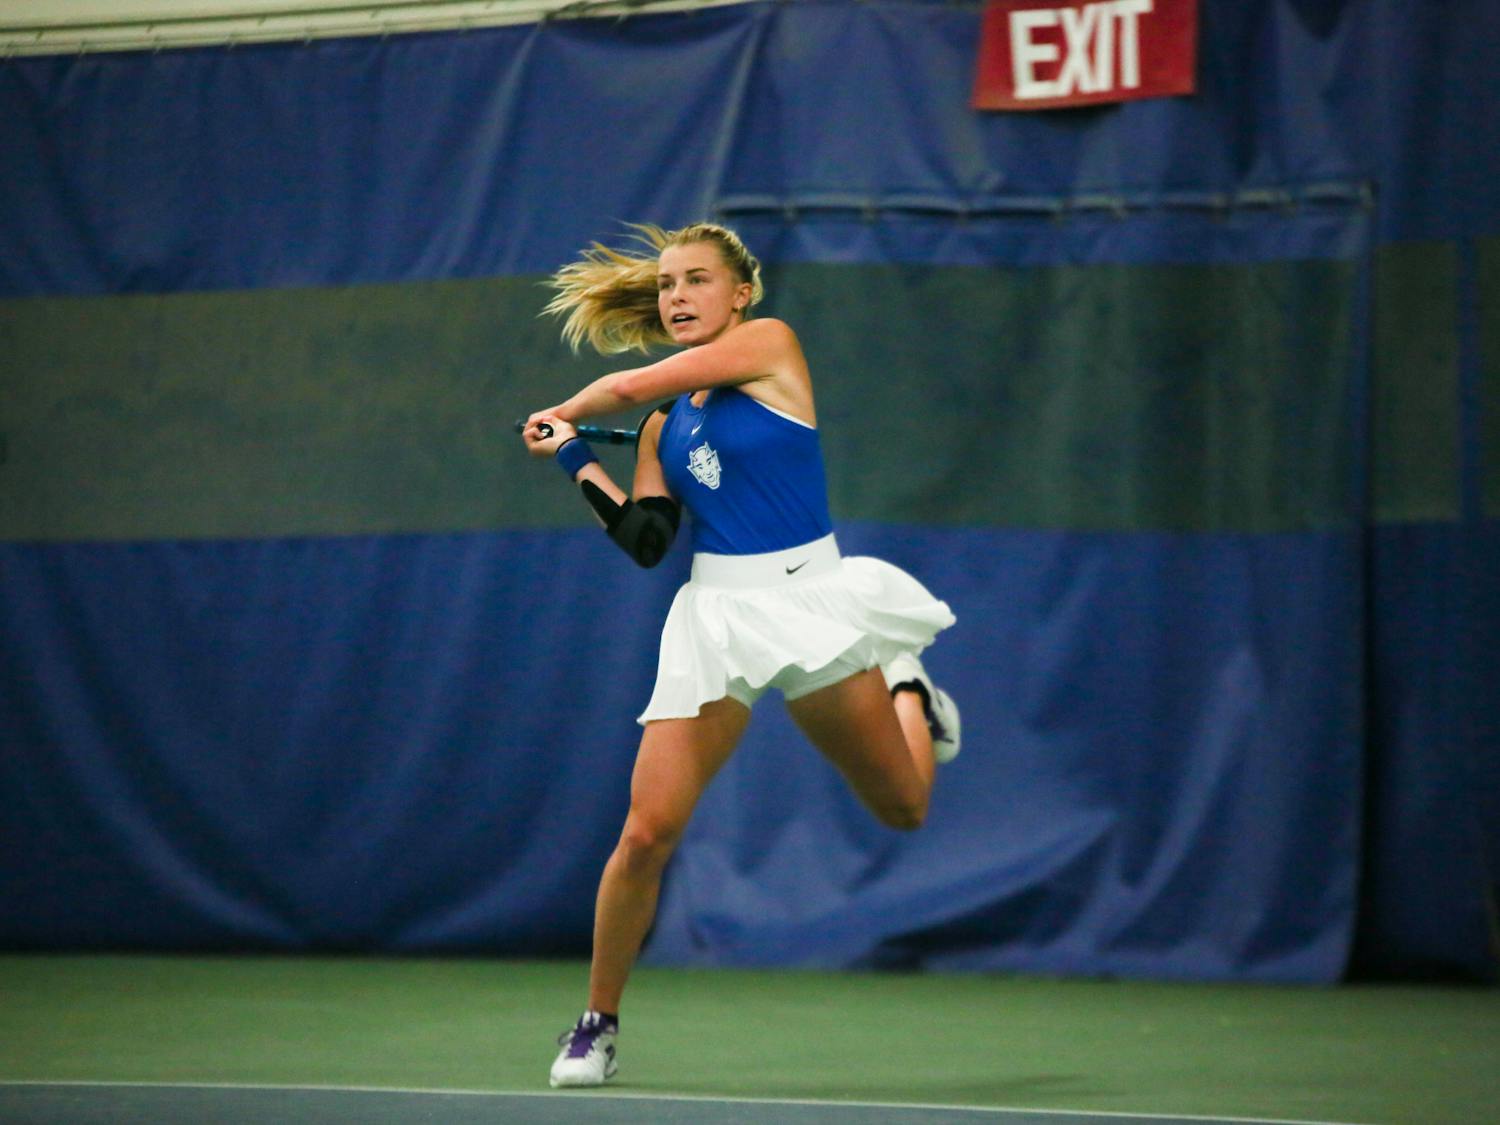 Emma Jackson, shown above in Duke's April 8 win against N.C. State, dropped her singles match on court two Friday.